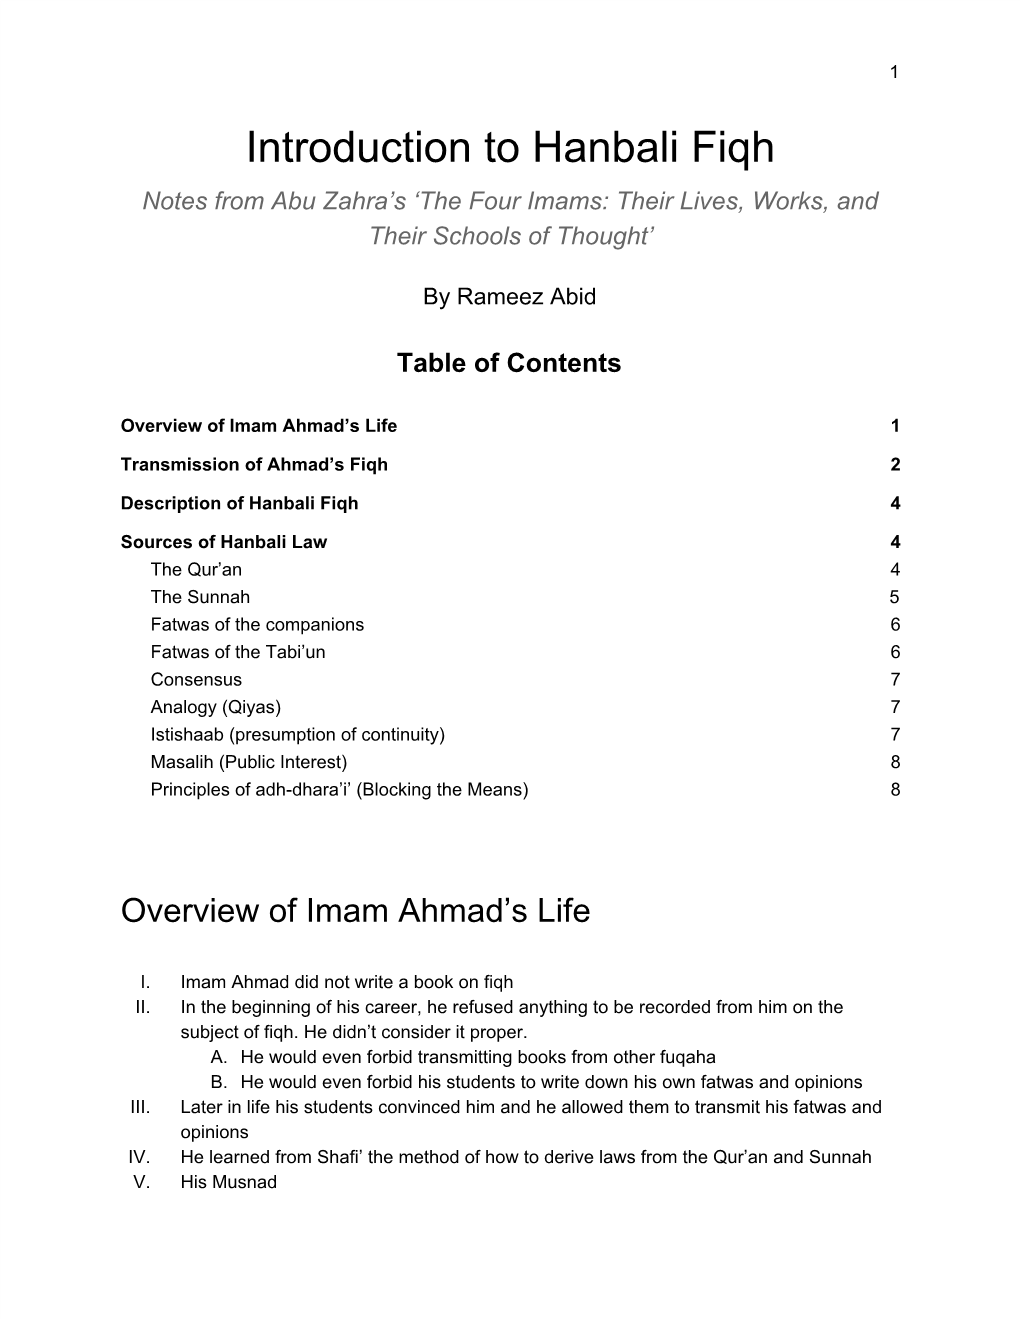 Introduction to Hanbali Fiqh Notes from Abu Zahra’S ‘The Four Imams: Their Lives, Works, and Their Schools of Thought’